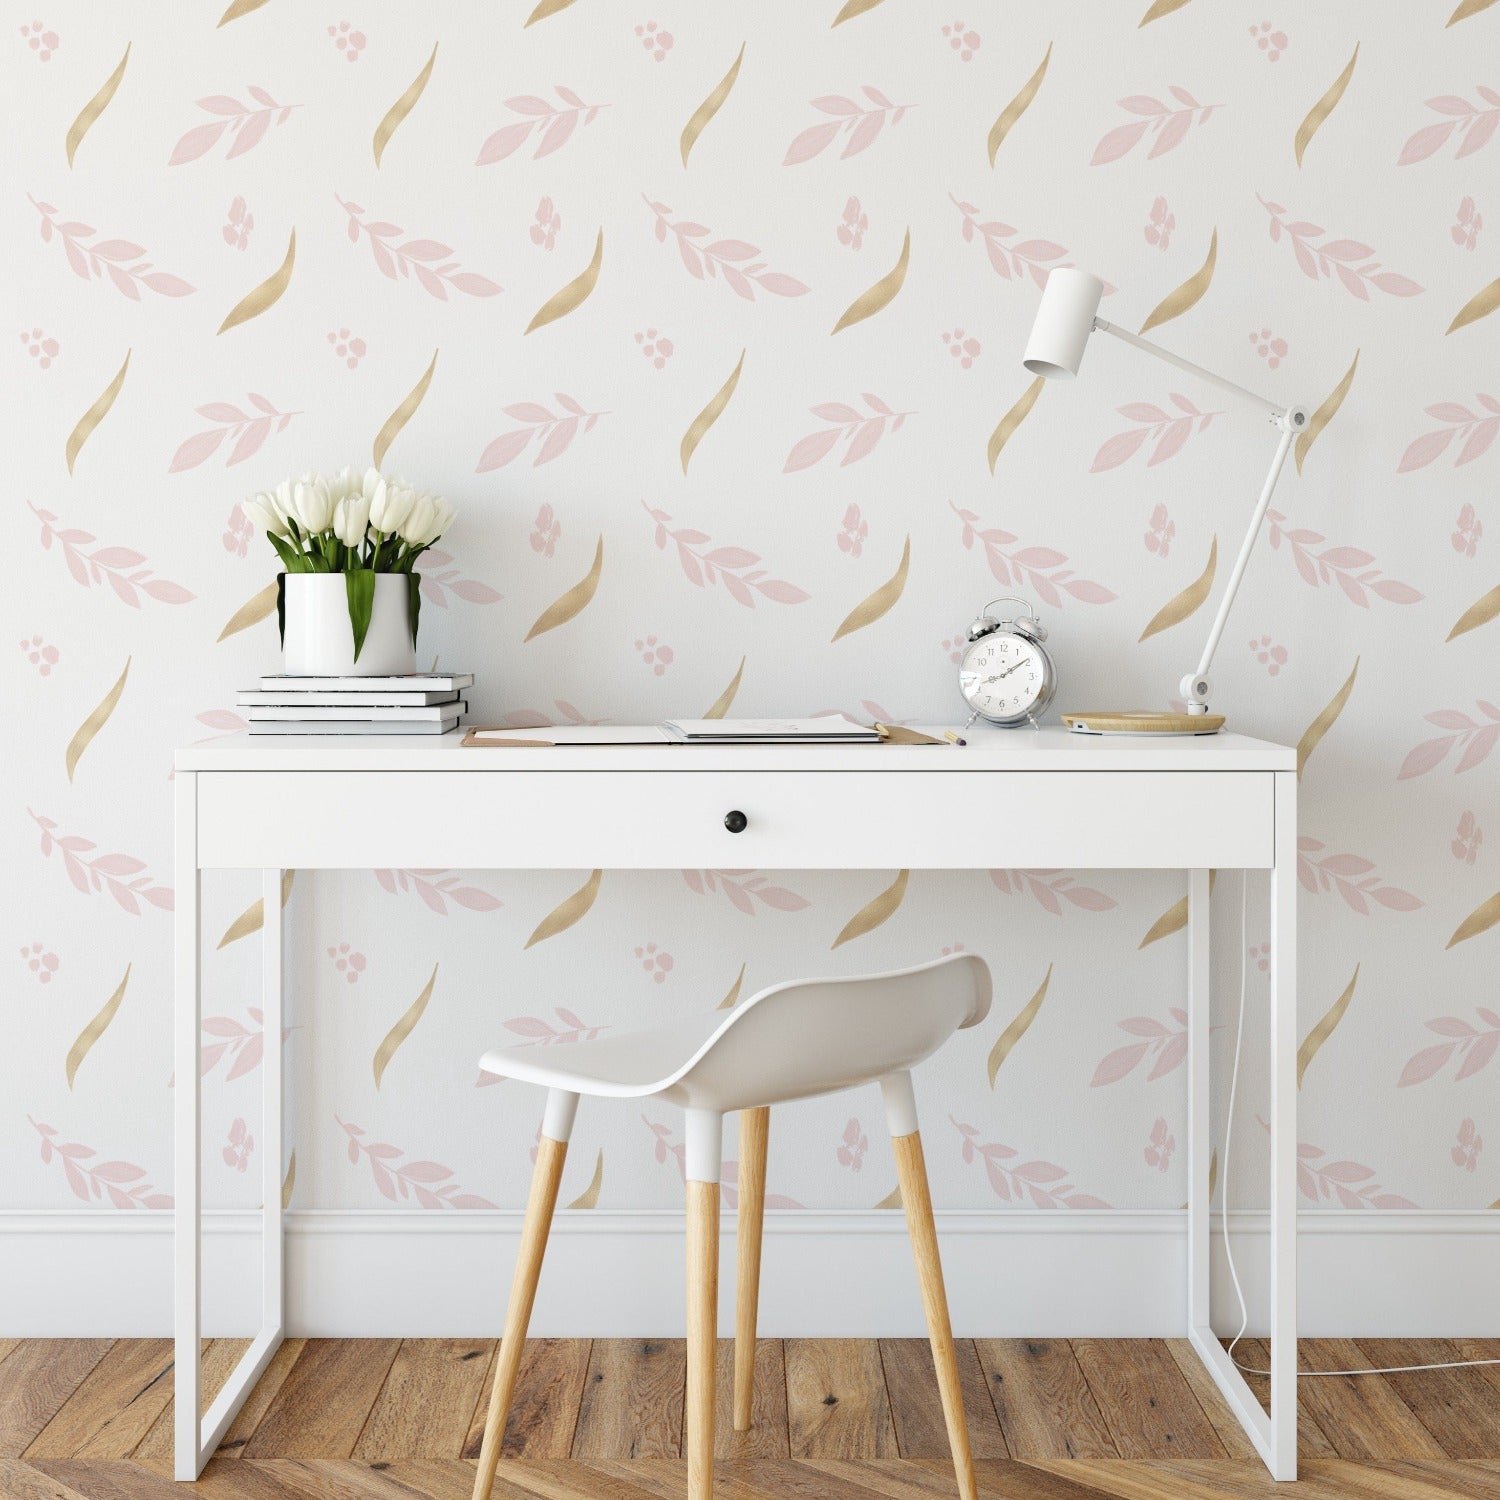 Golden Pink Floral Collection Wallpaper in a modern study setting with a white desk and chair, highlighting the wallpaper's charming floral design.